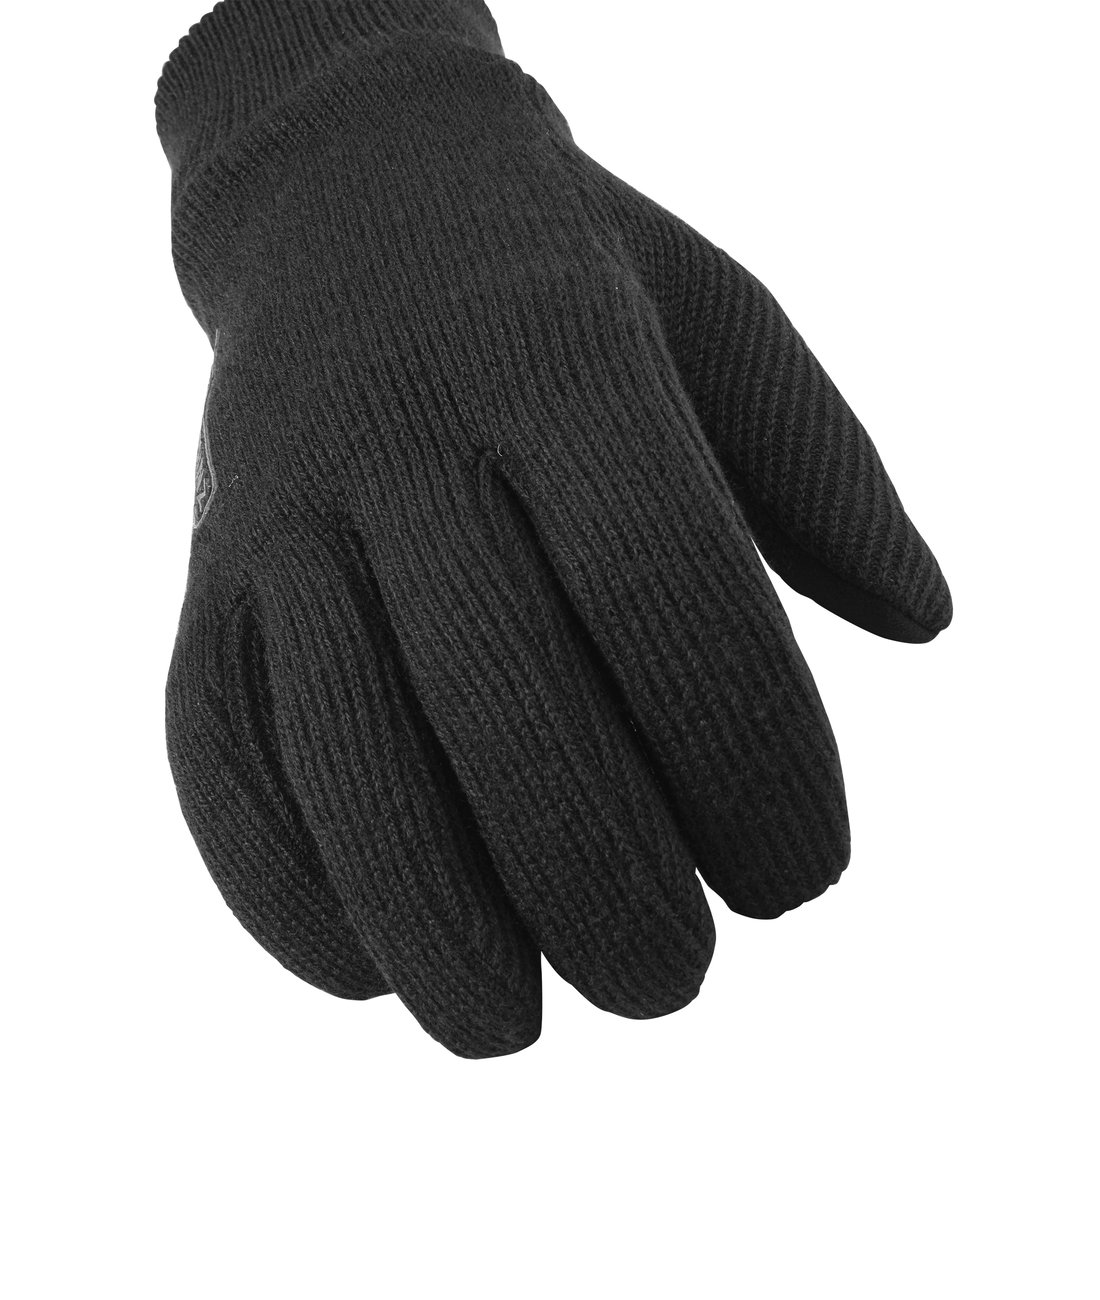 Necton - Windproof All Weather Knitted Glove